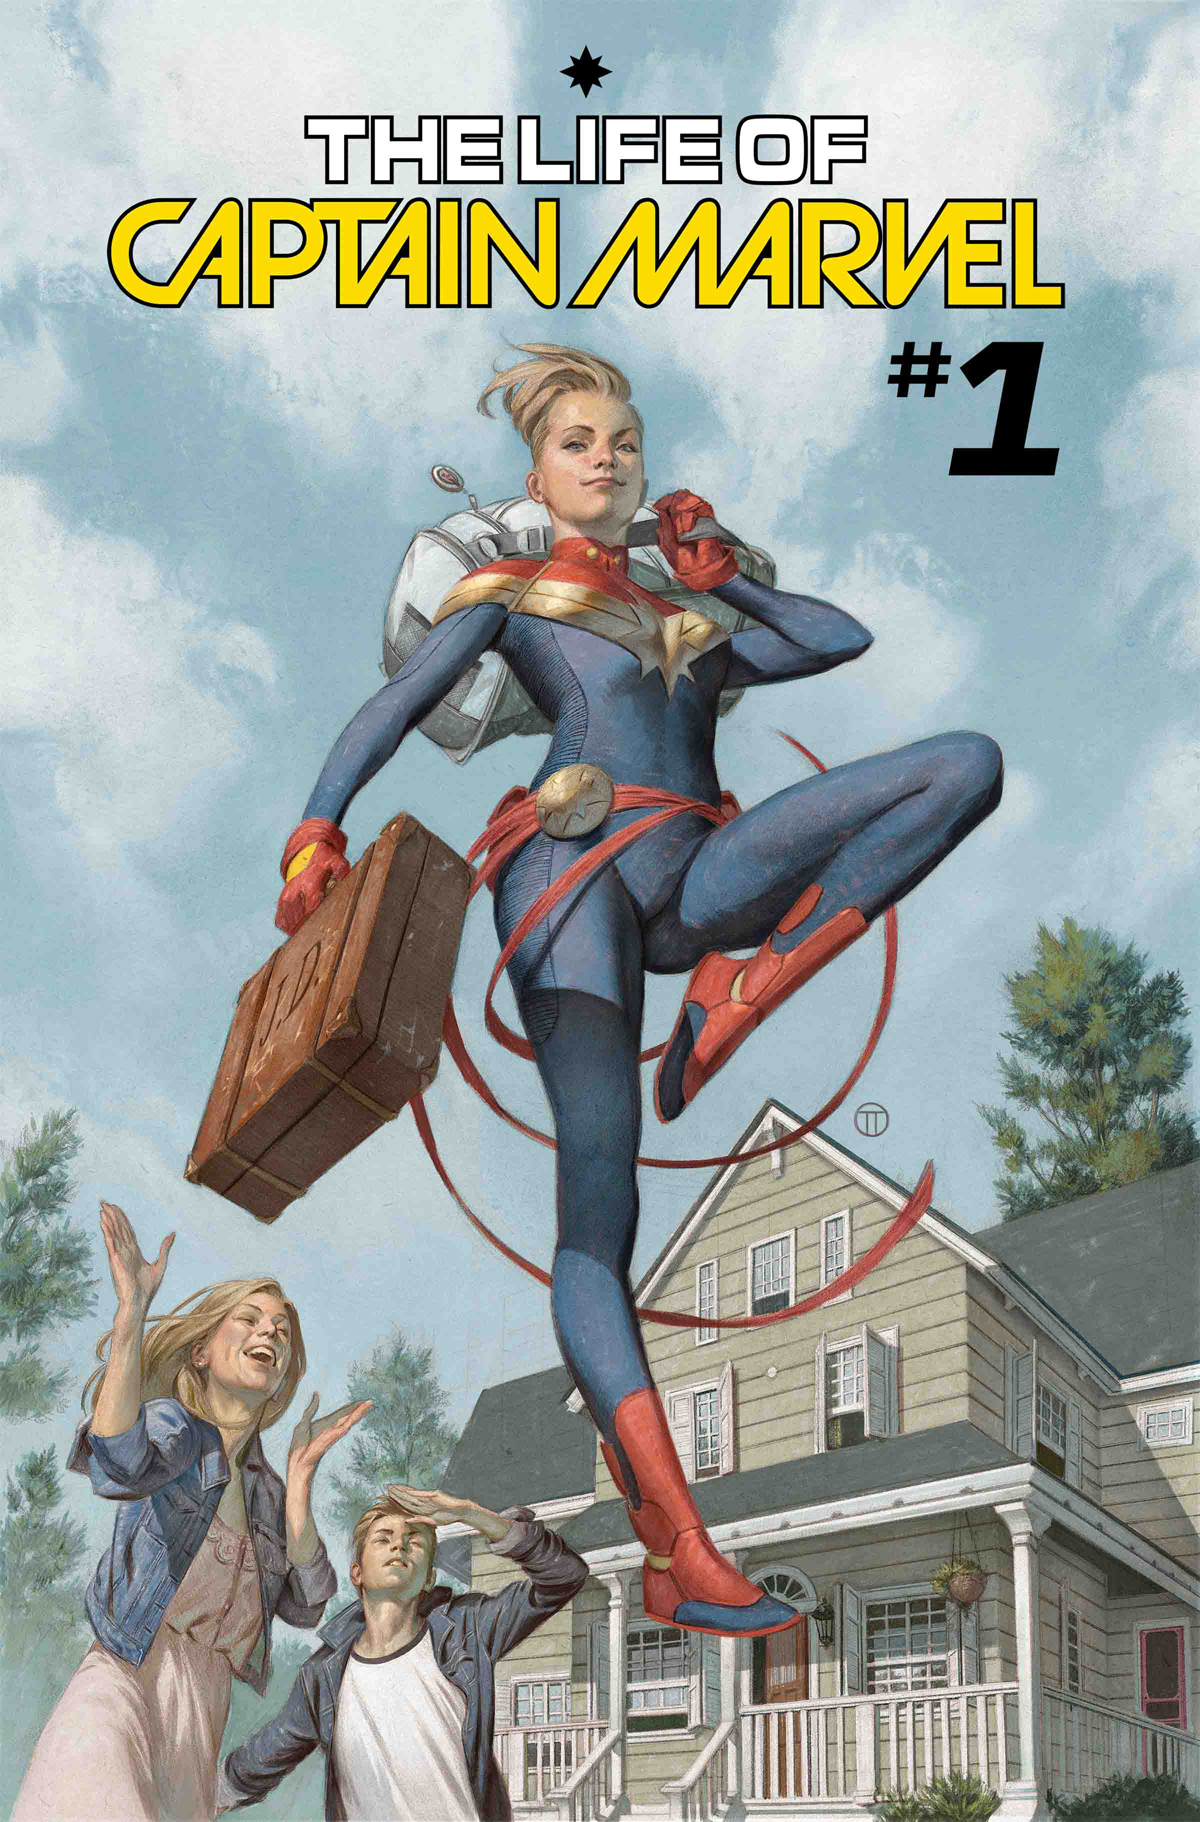 LIFE OF CAPTAIN MARVEL #1 (OF 5)